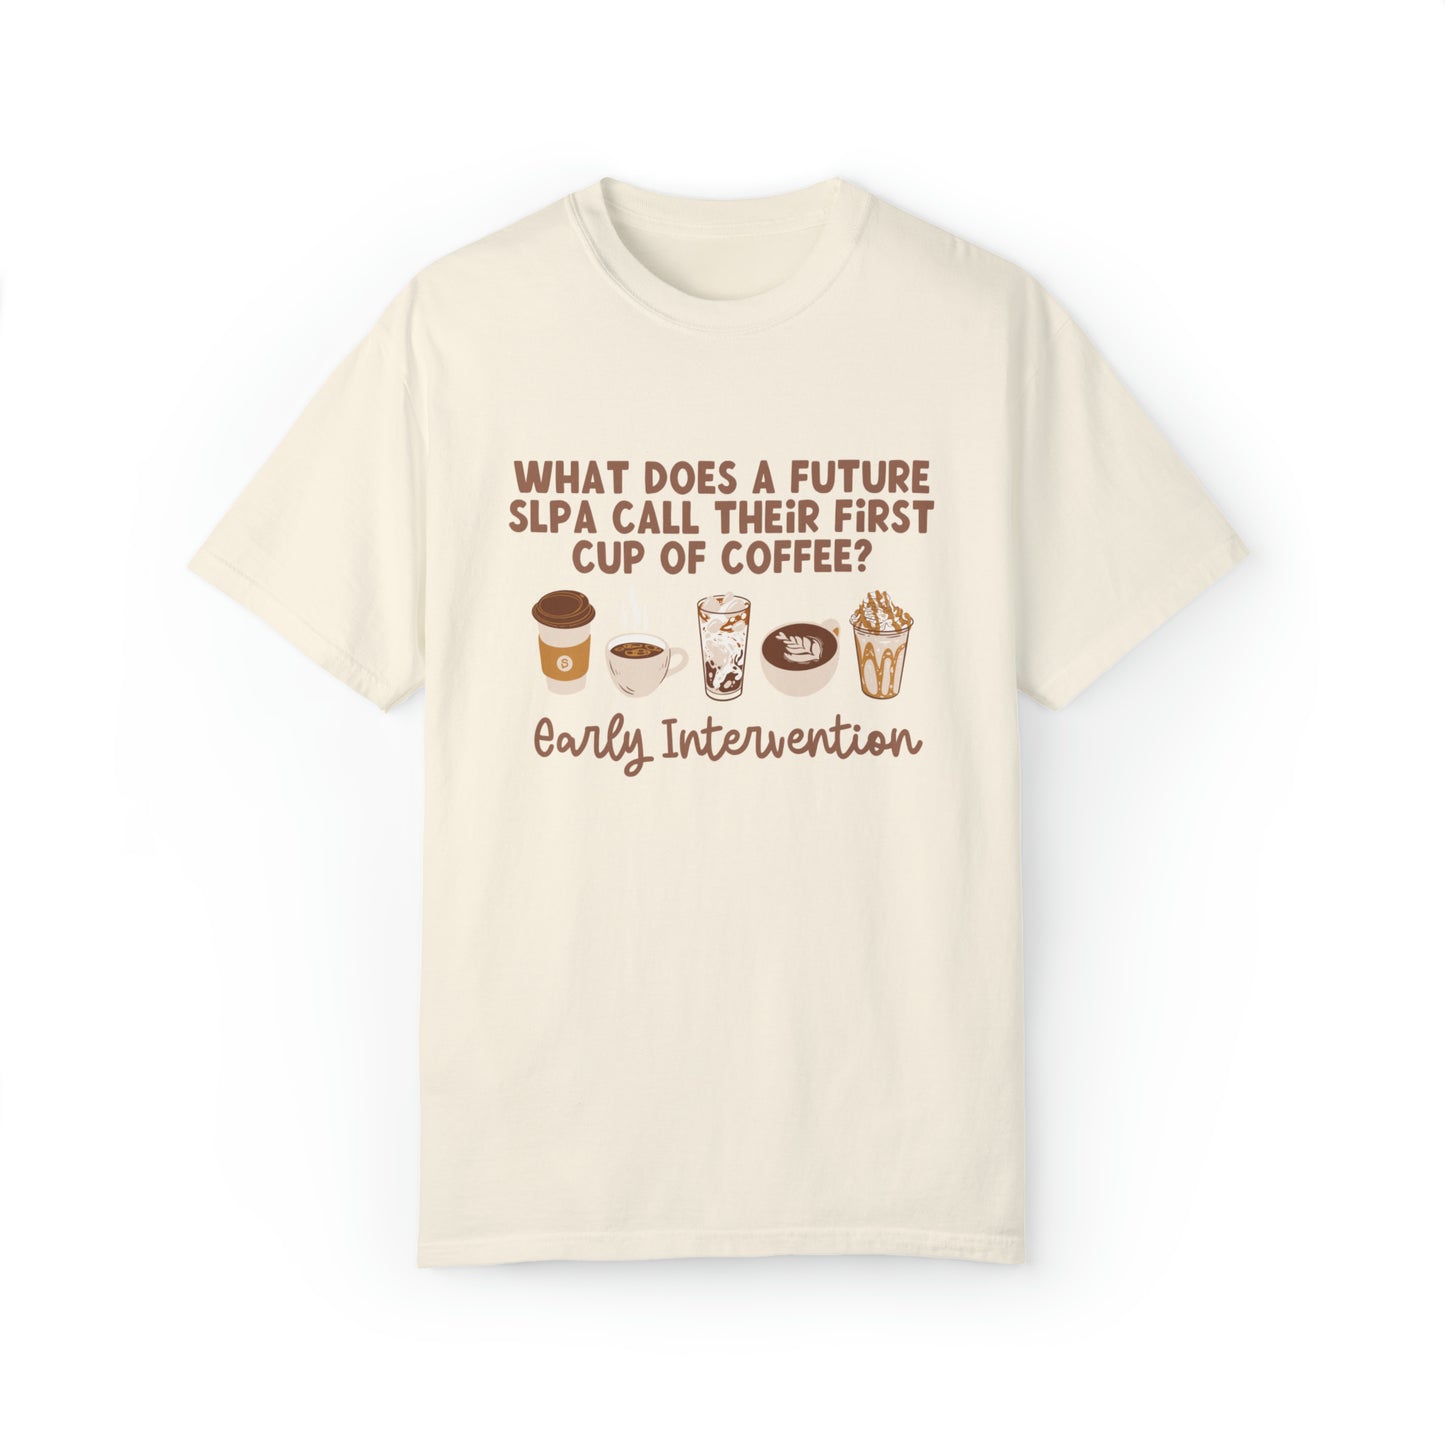 What Does A Future SLPA Call Their First Cup of Coffee Tee